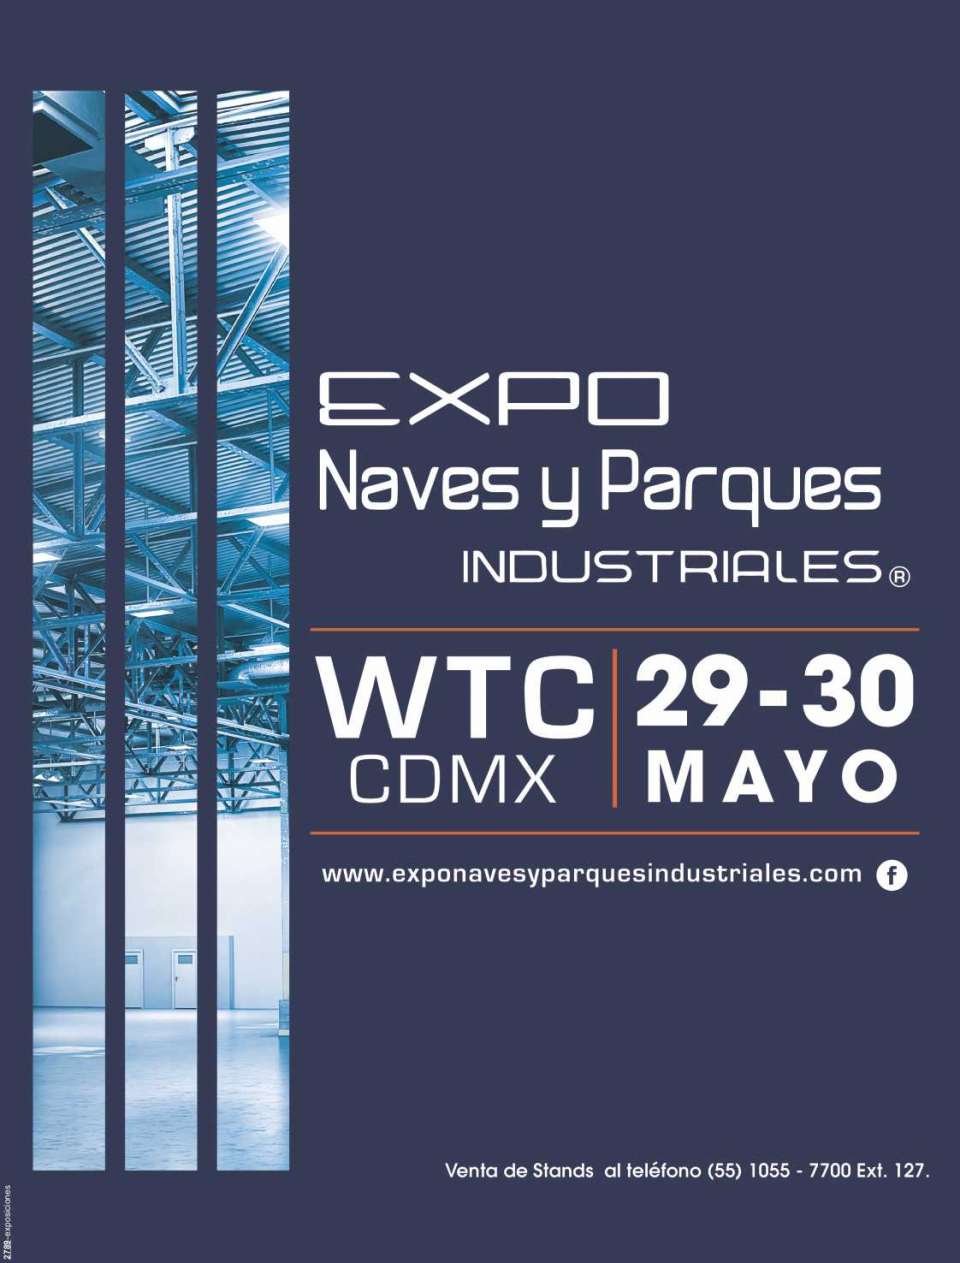 The Industrial Parks Trade Show, May 9 to 30, 2019 in WTC Mexico City.